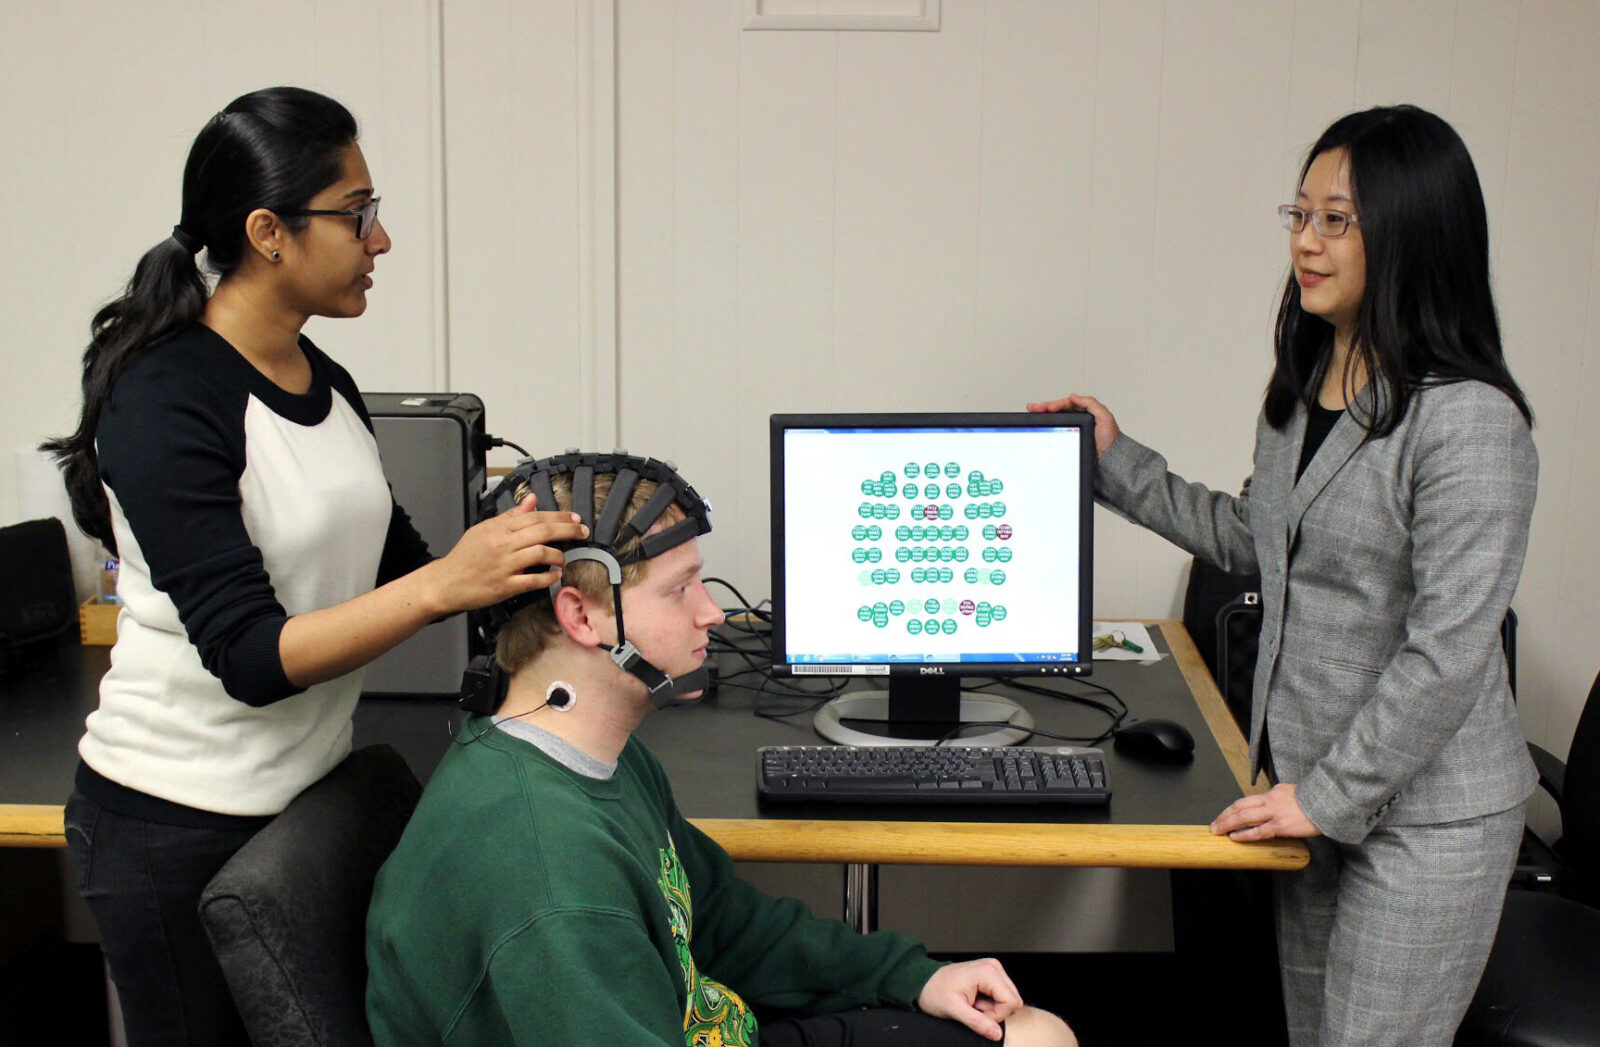 Tejaswini Yelamanchili affixes an electroencephalogram (EEG) headset on S&T student Bryan Fox. Fox, a senior in information science and technology, is aiding Yelmanchili's research on "flow" by playing the video game Tetris. With Yelmanchili and Fox is Yelmanchili's advisor, Dr. Fiona Nah.